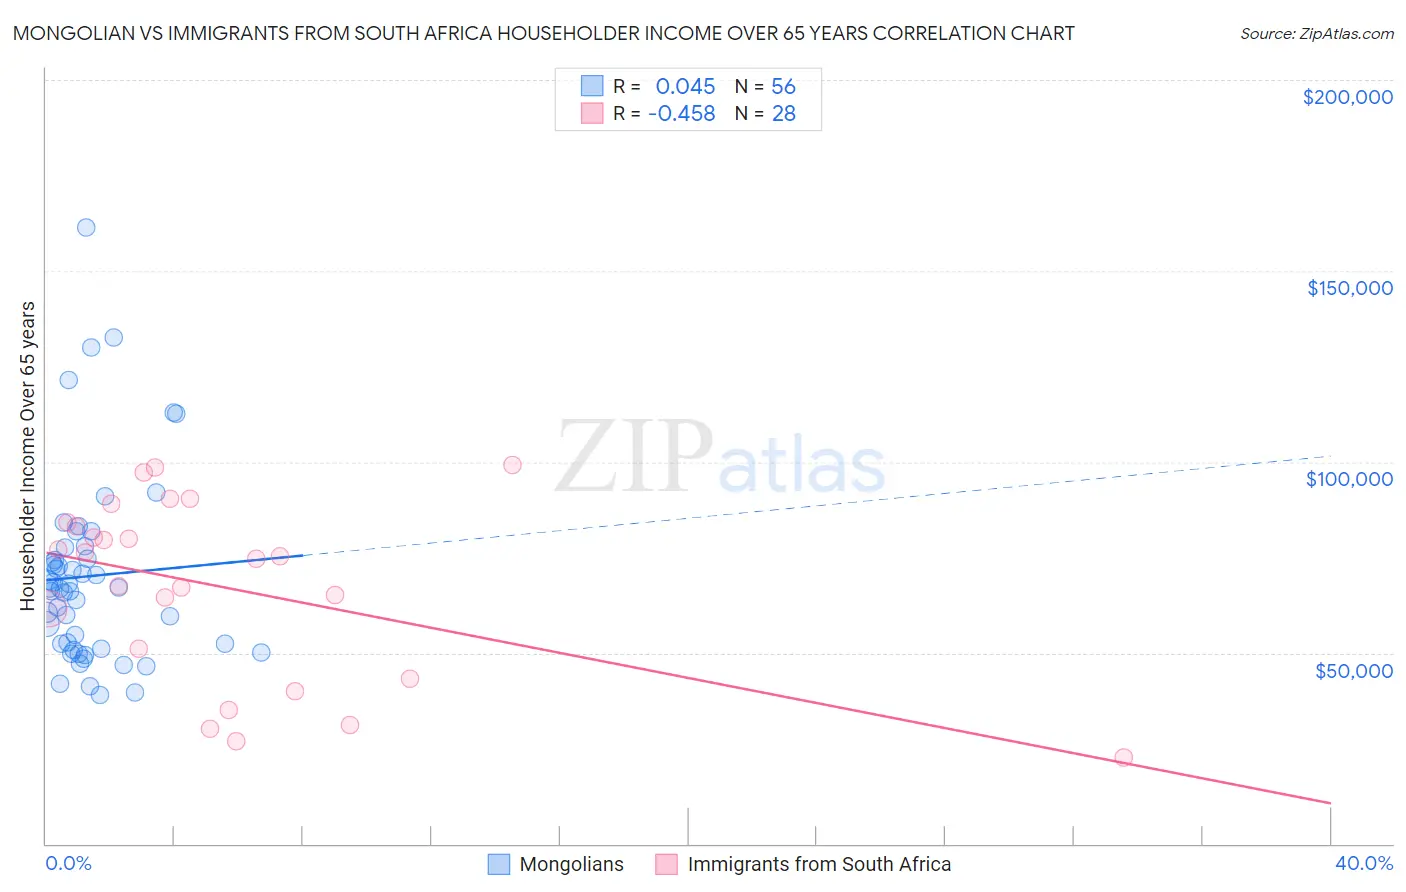 Mongolian vs Immigrants from South Africa Householder Income Over 65 years